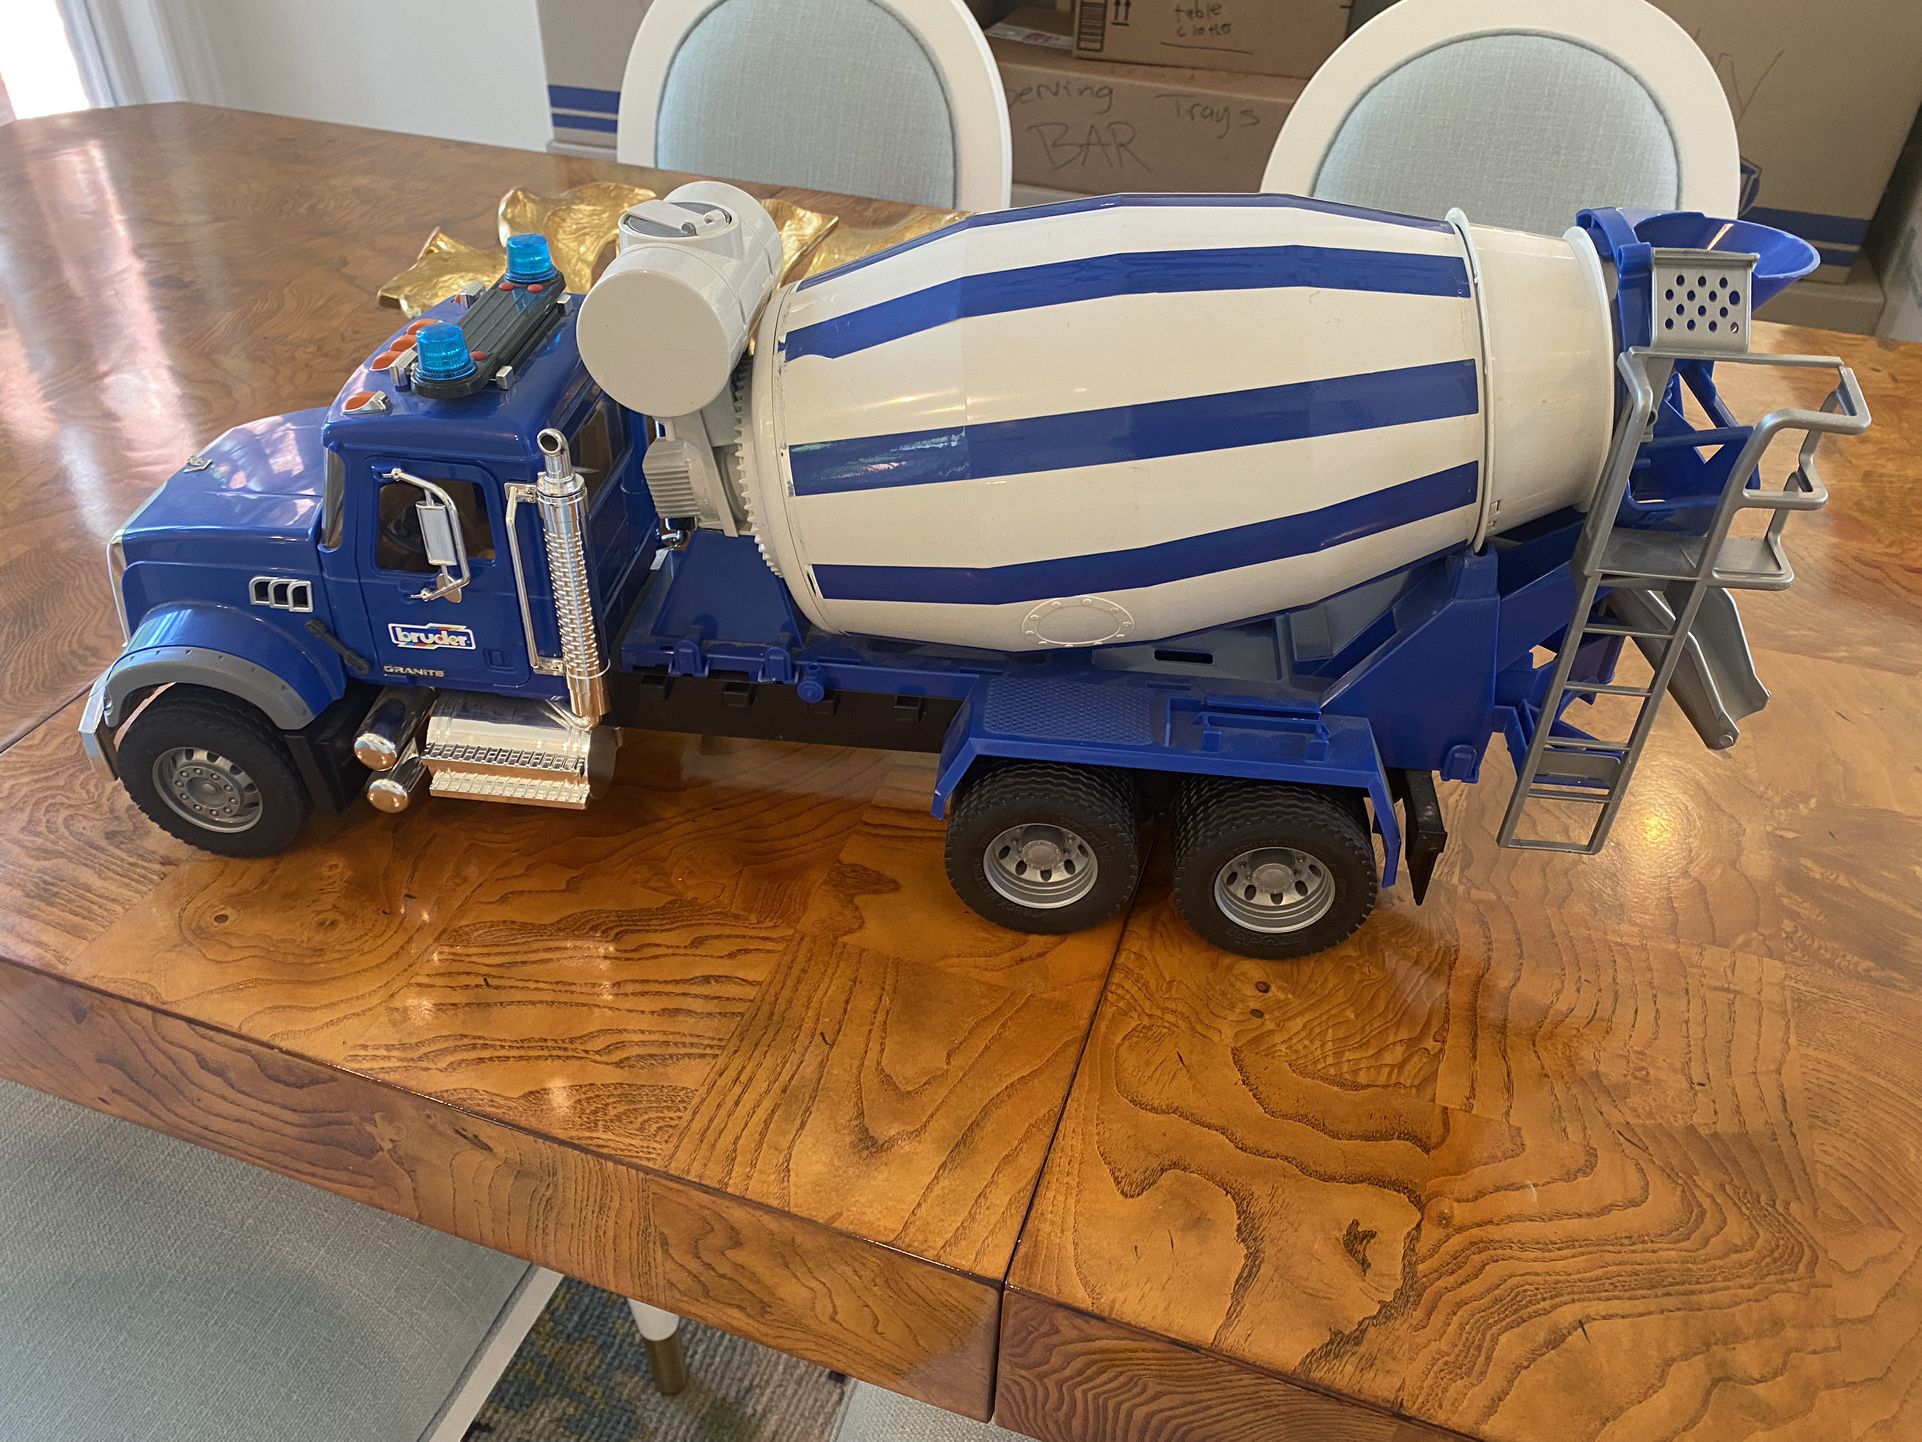 Toy Cement mixer 